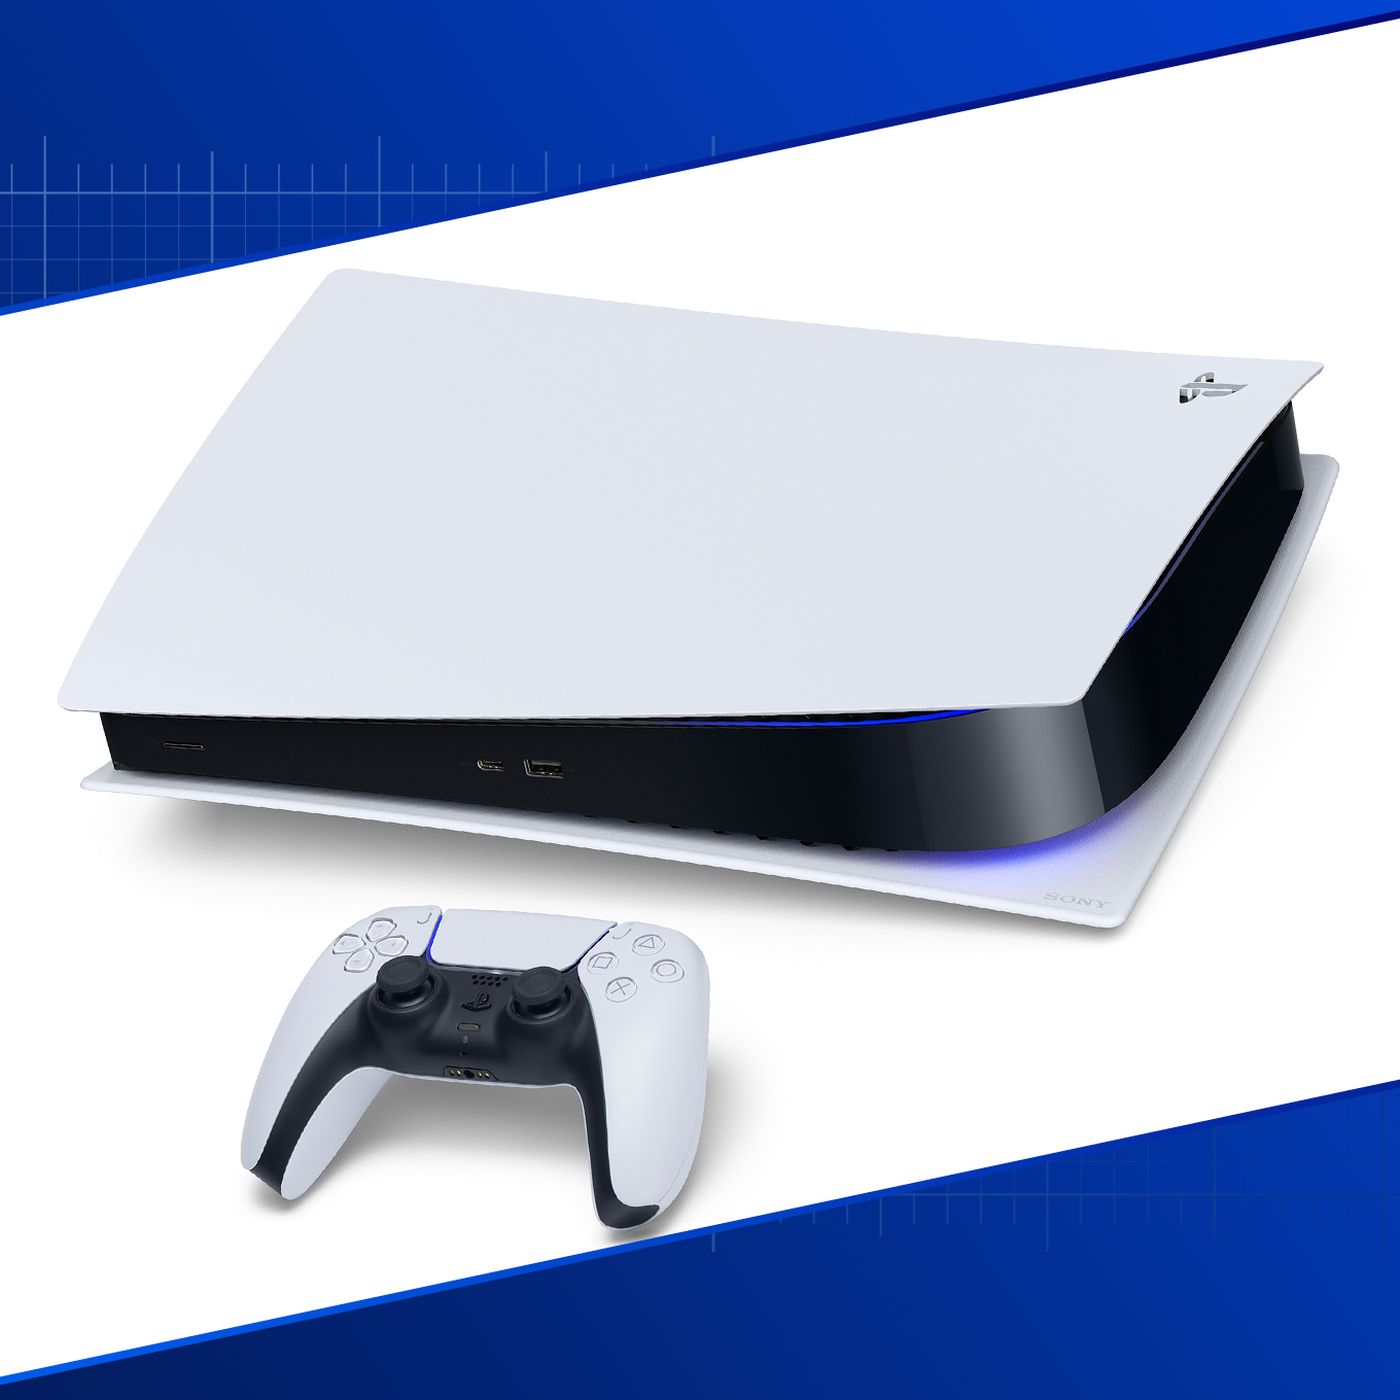 PS5 details: games, price, release date, backward compatibility